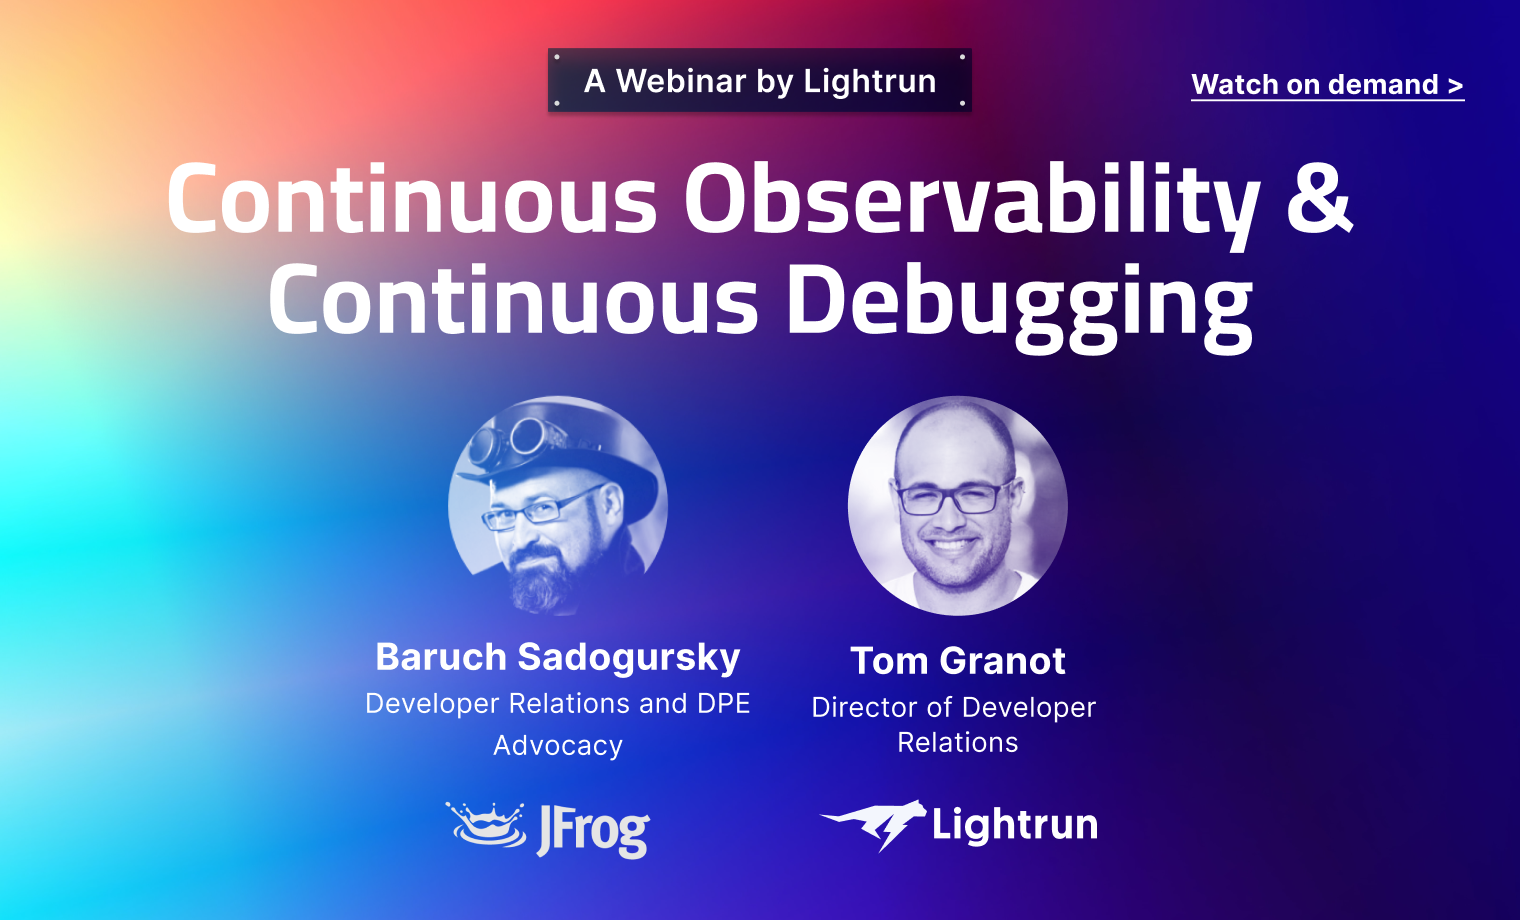 Continuous observability and continuous debugging